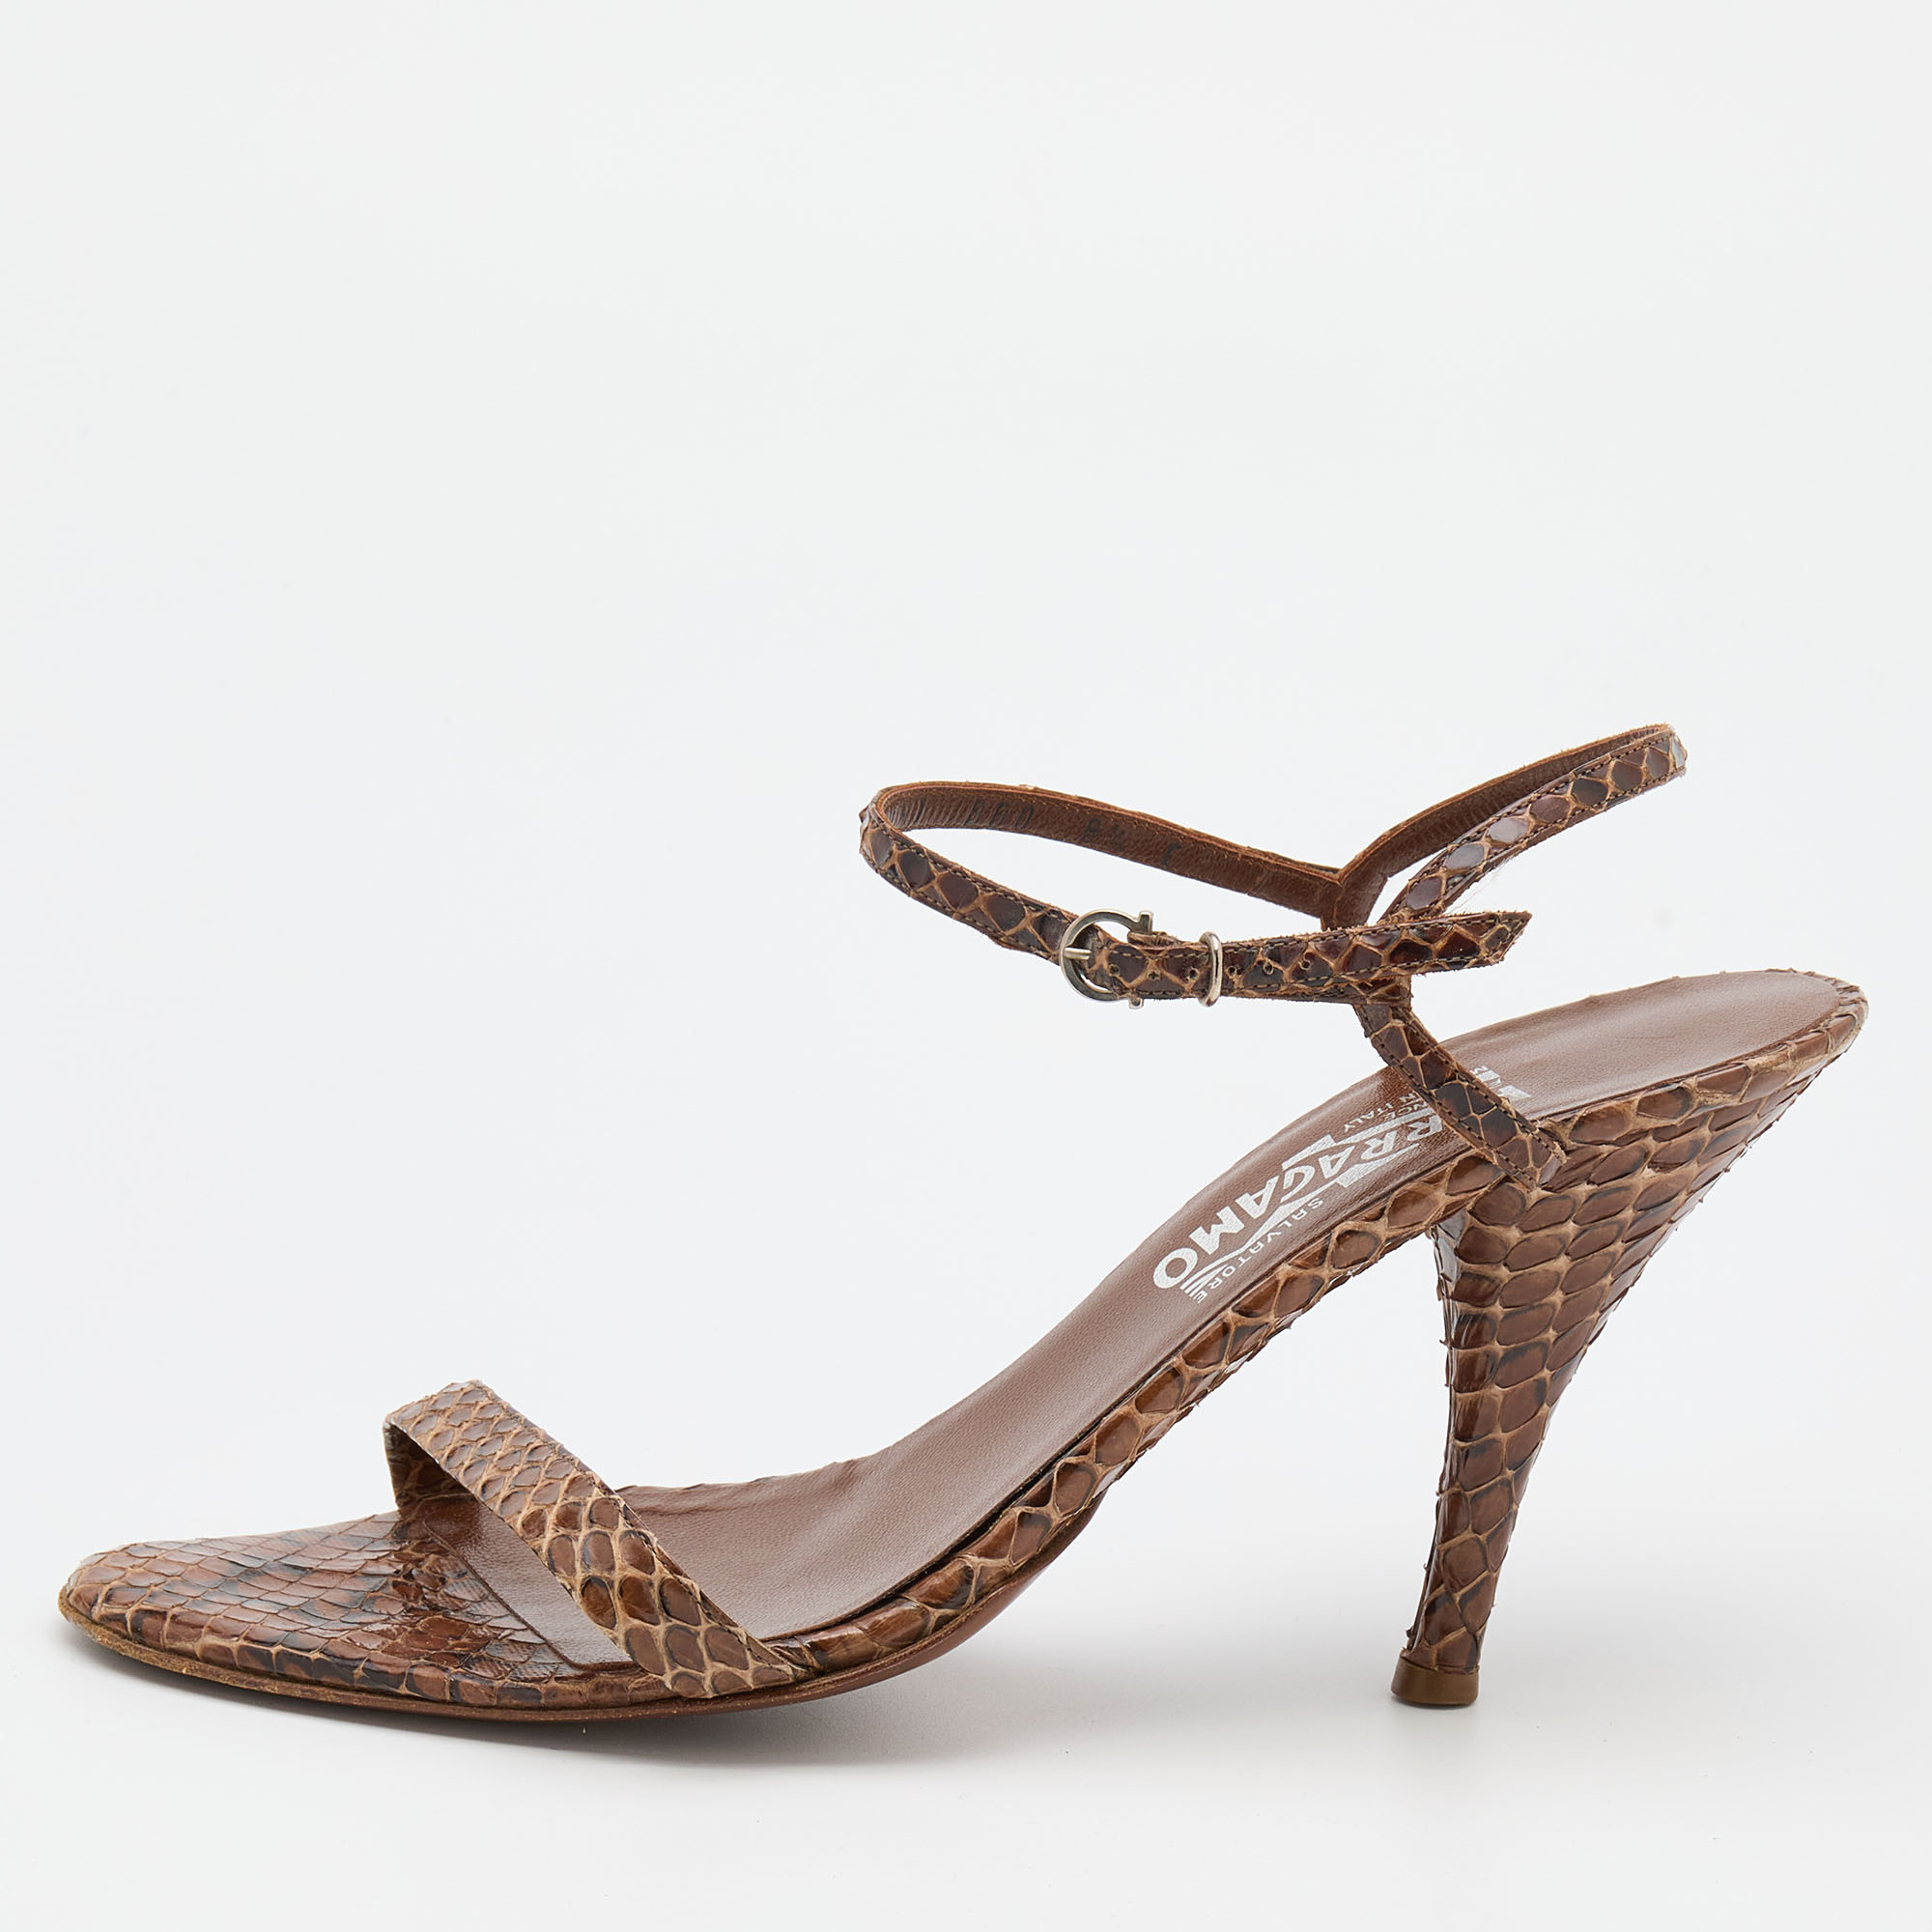 Pre-owned Ferragamo Brown Python Ankle Strap Sandals Size 39